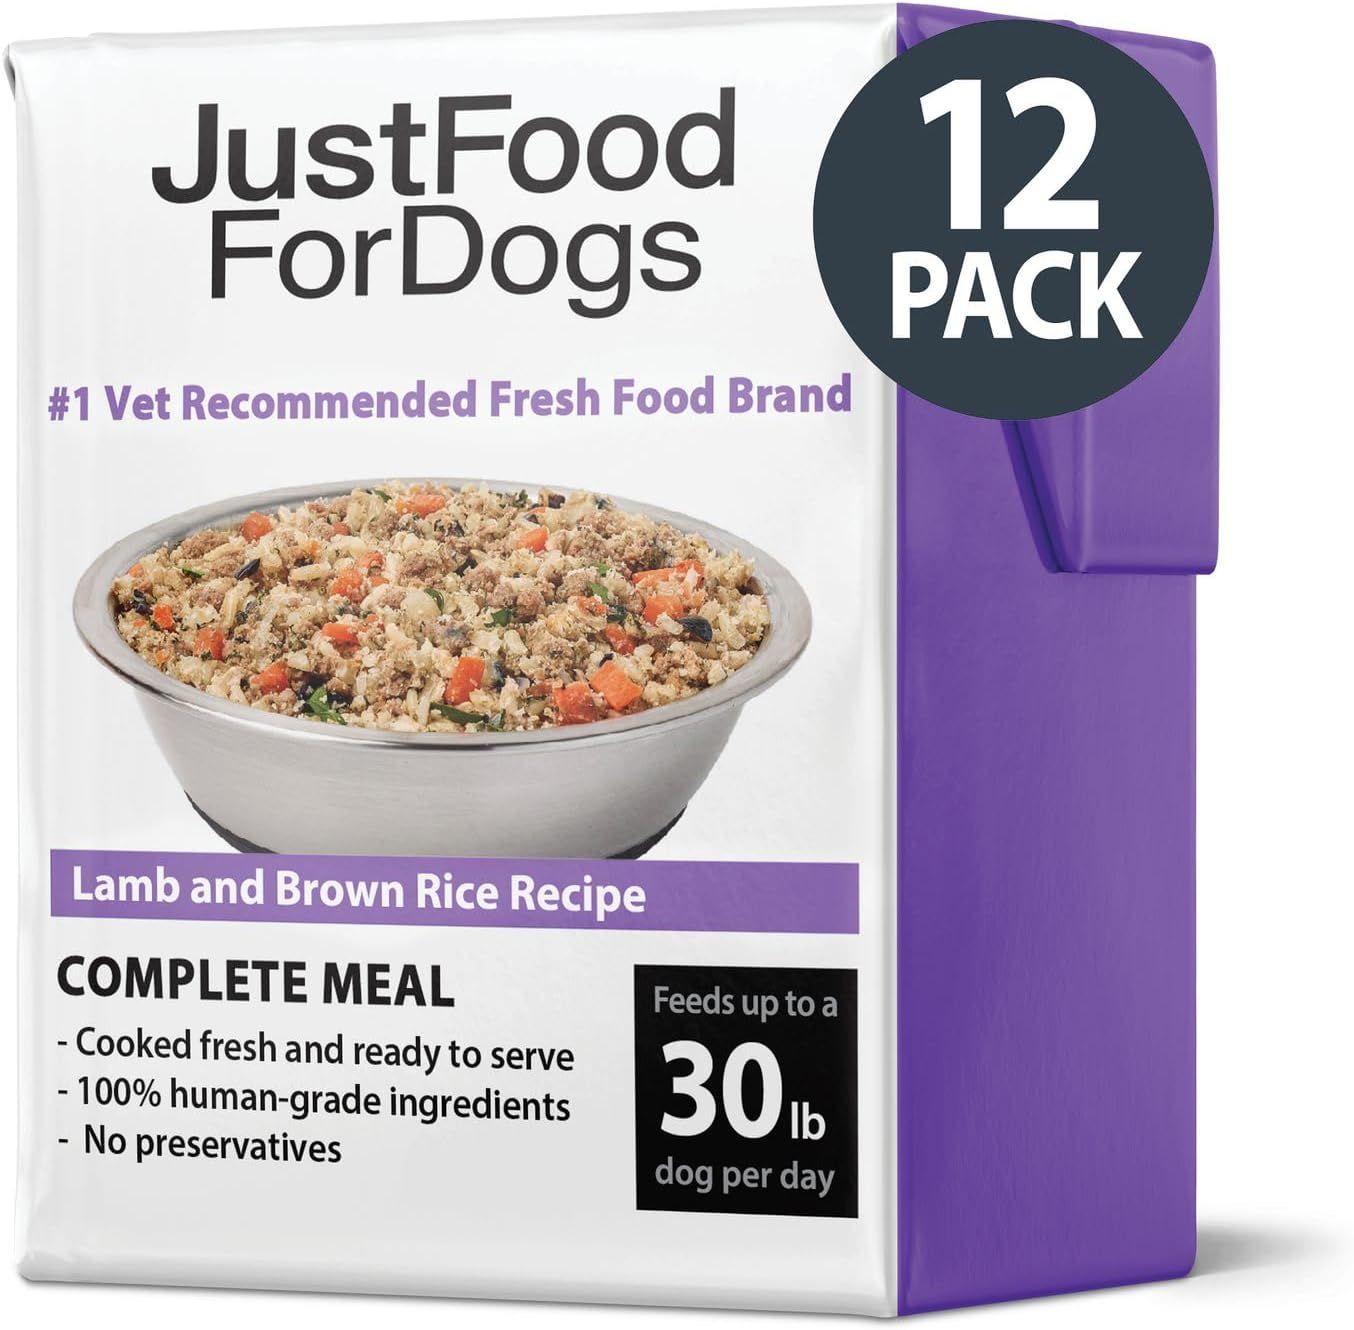 Top 10 Best Frozen Dog Food Products for Your Furry Friend